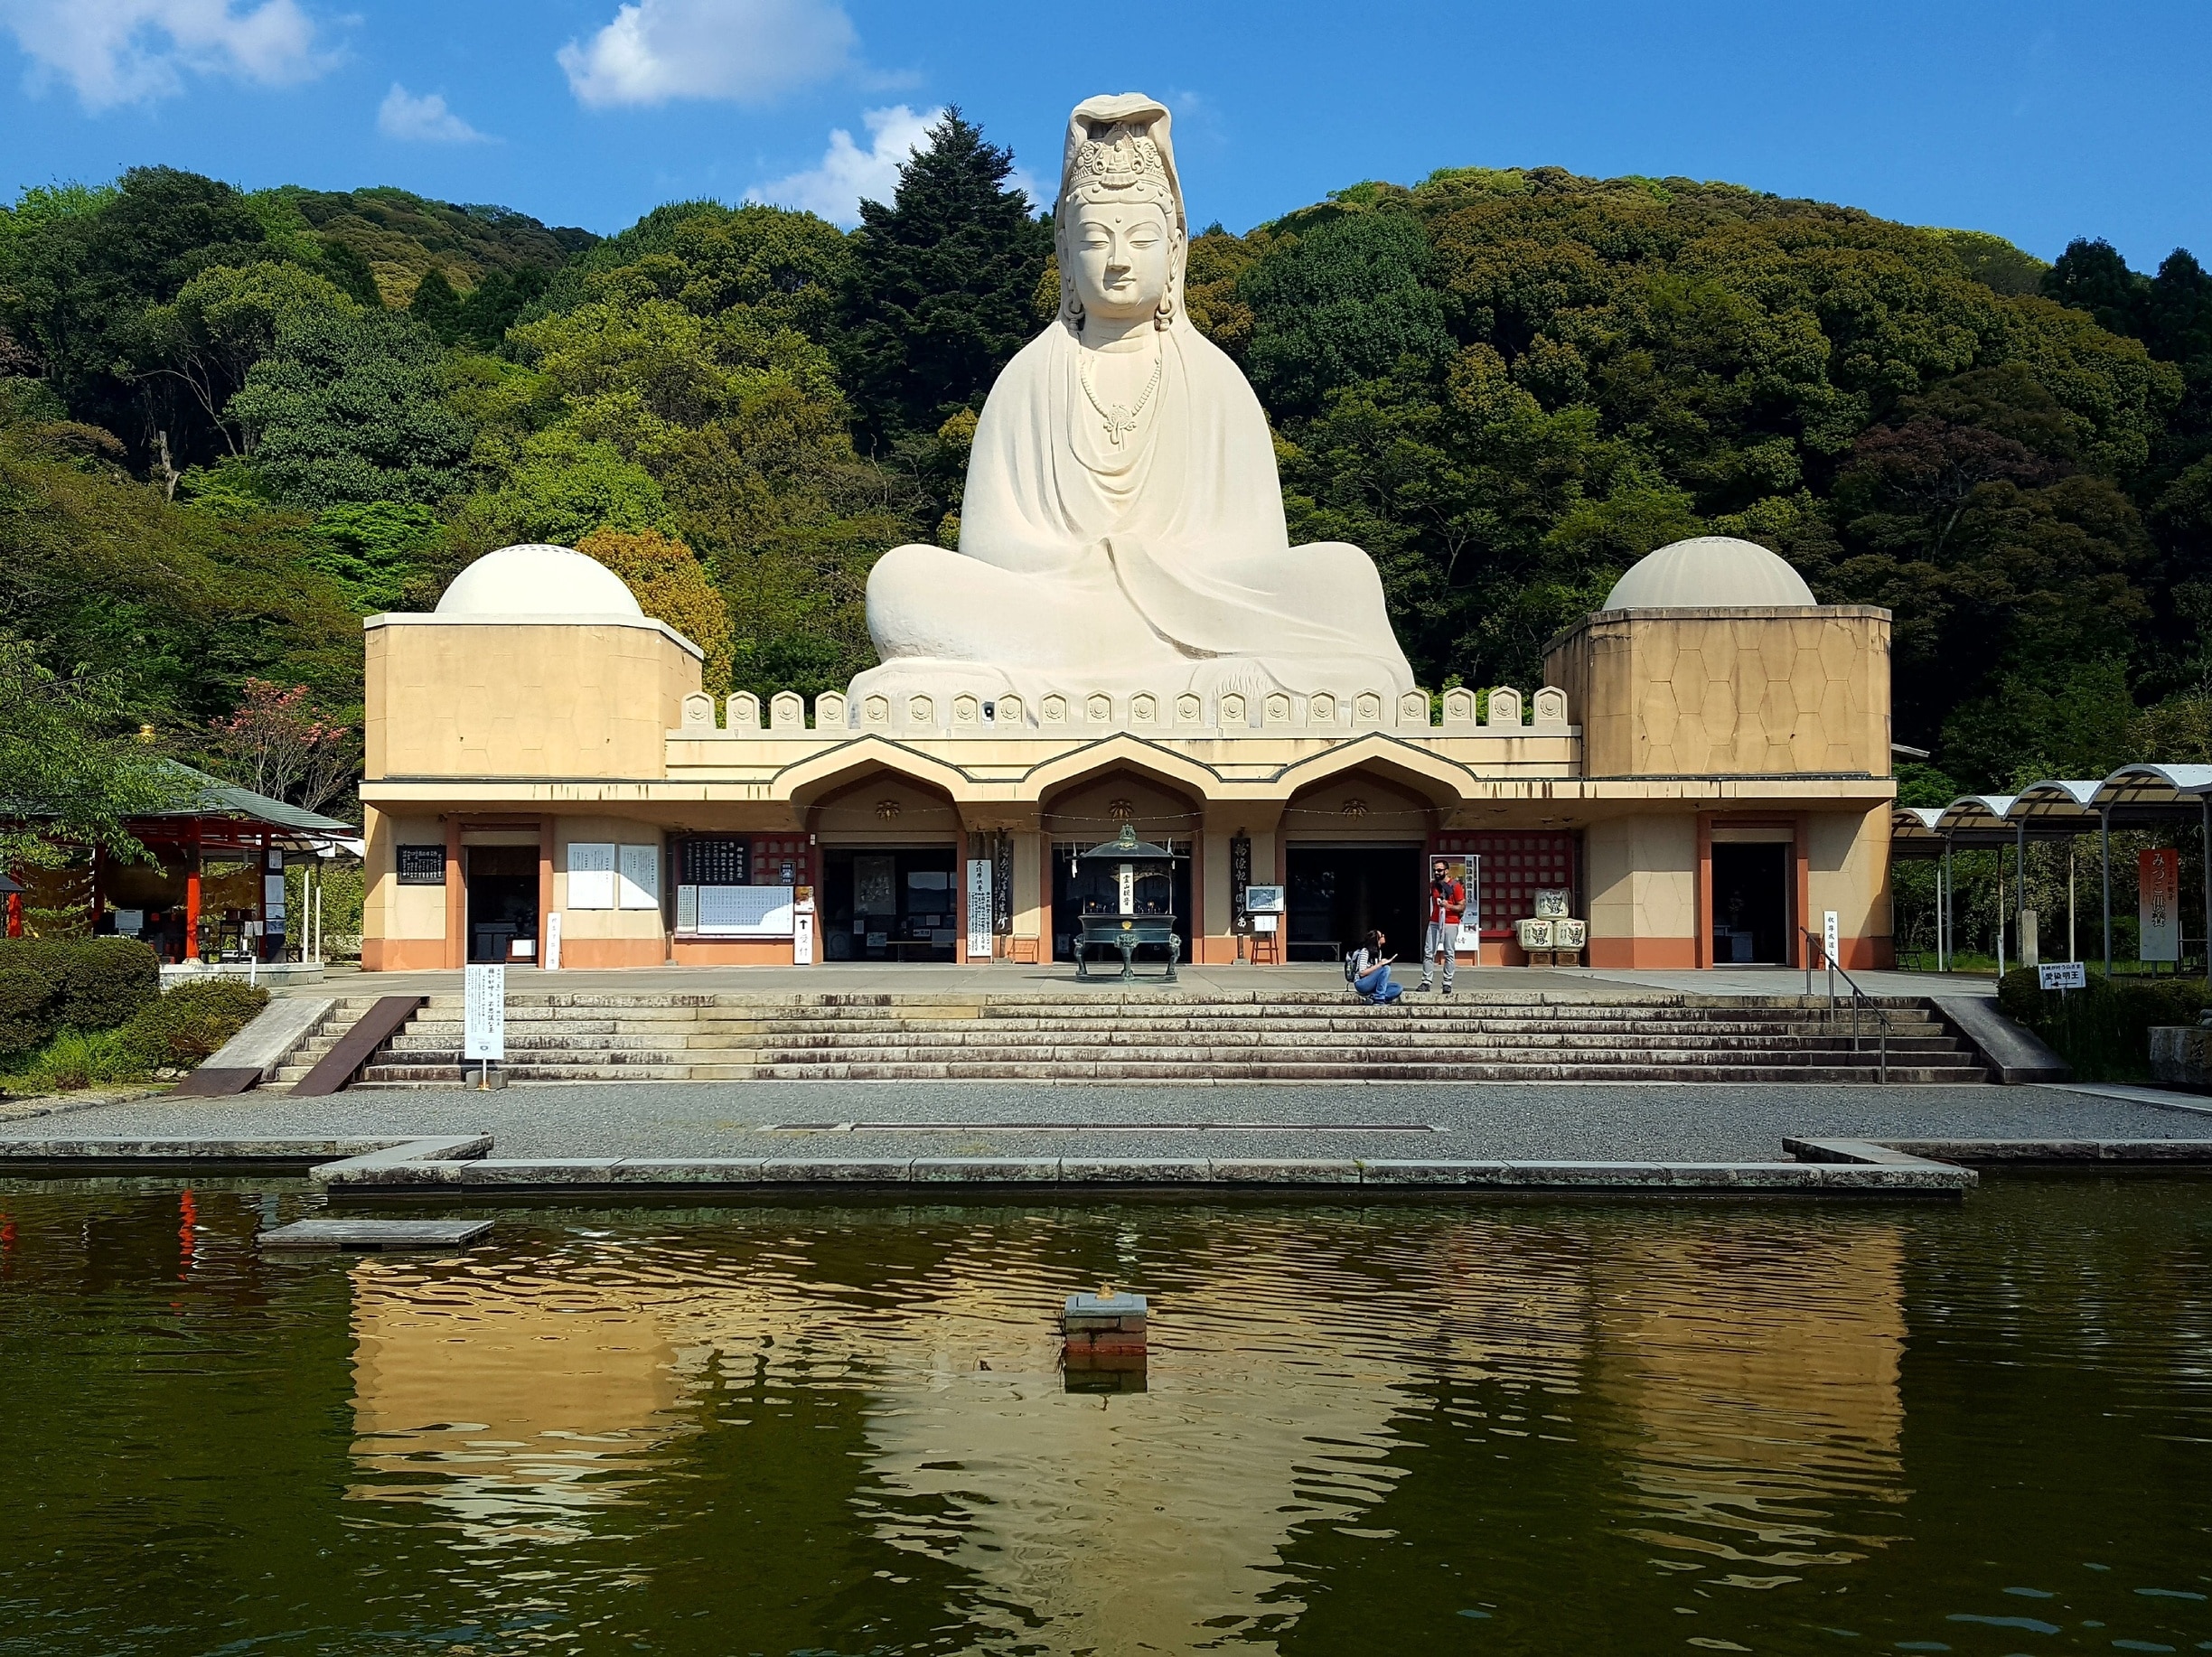 Largest Buddha in Kyoto, this serves as a memorial for Japanese soldiers

#LifeatExpedia